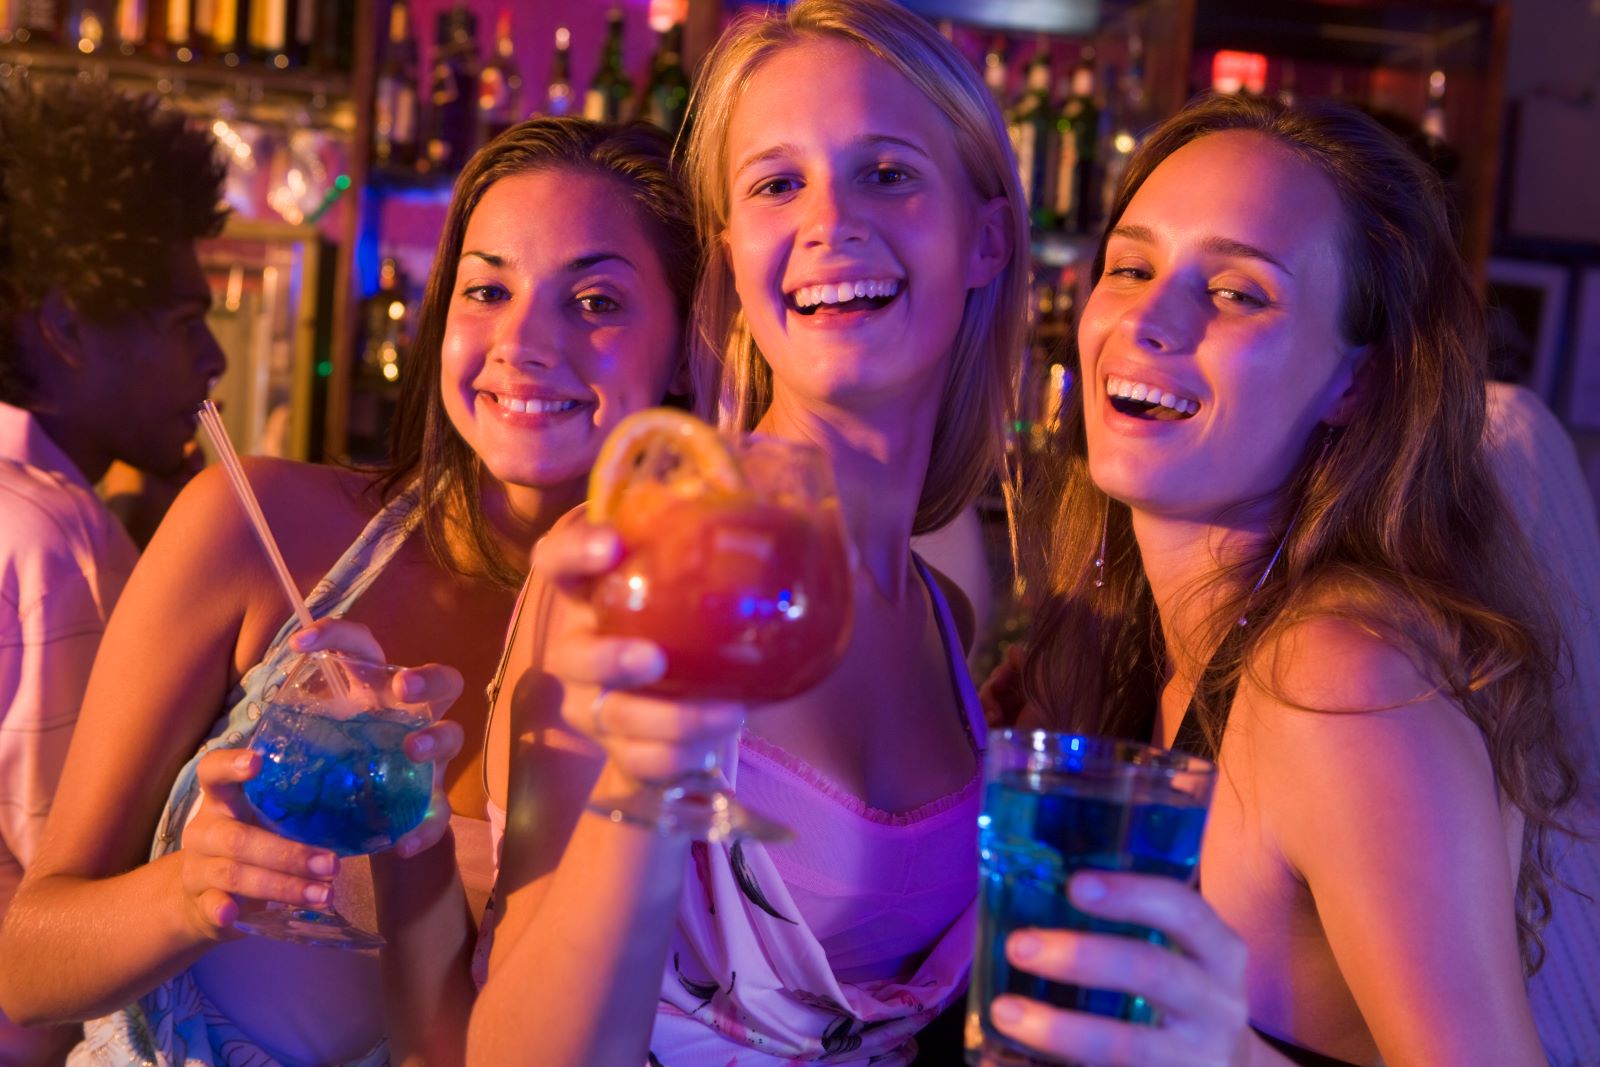 Three girls smiling and holding cocktails.